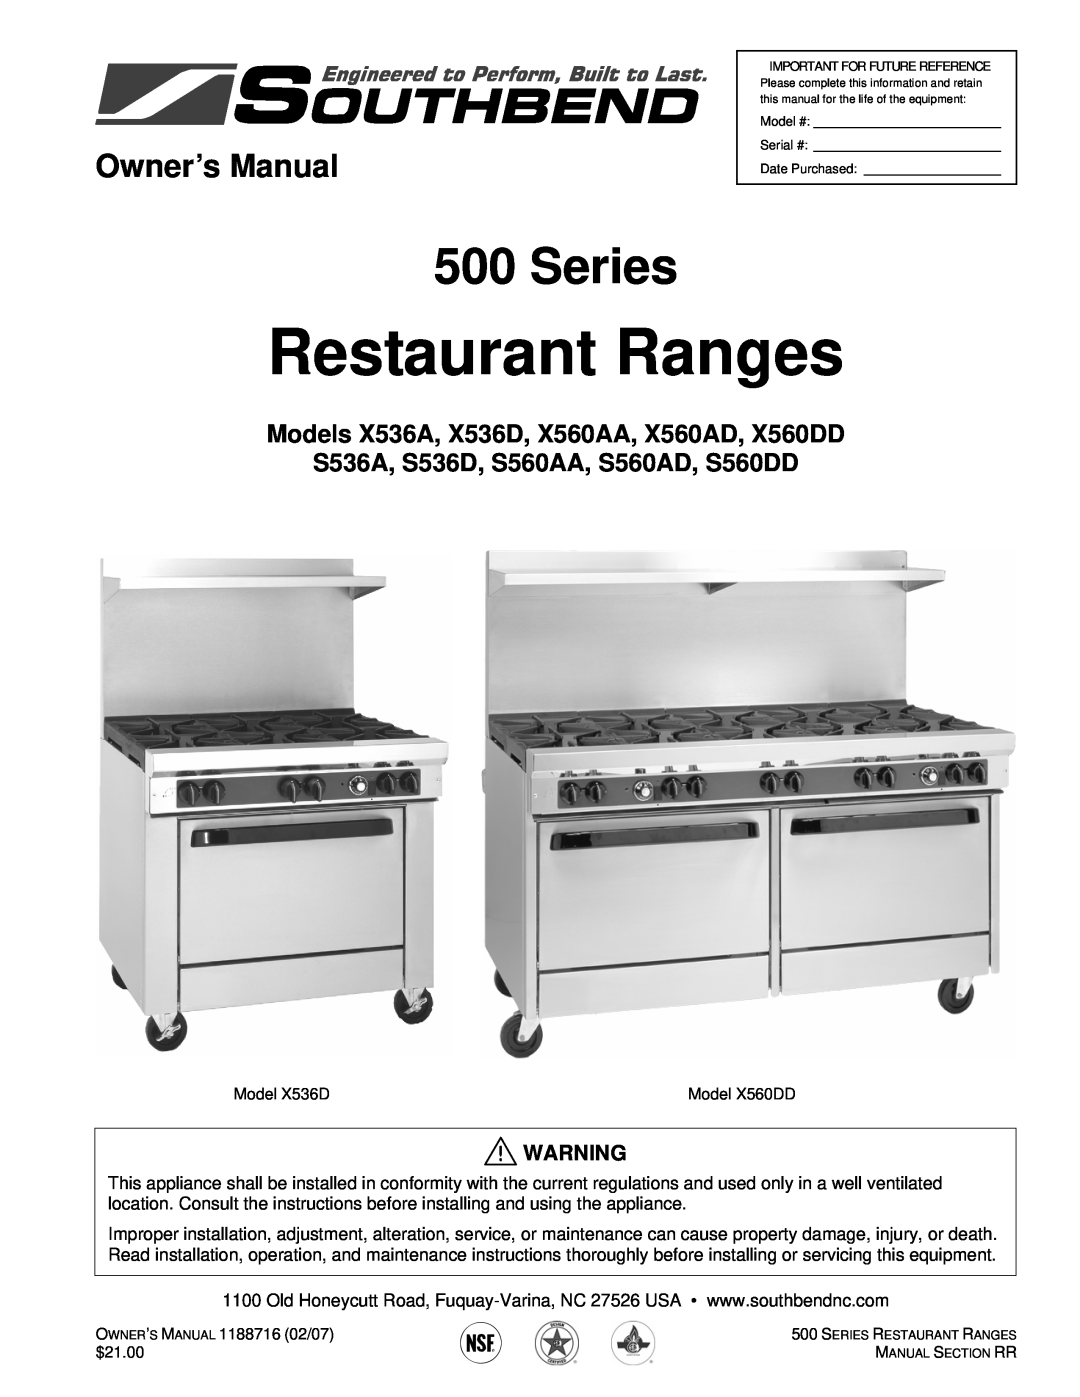 Southbend S560DD, S536D, S560AA owner manual Restaurant Ranges, Series, Models X536A, X536D, X560AA, X560AD, X560DD 